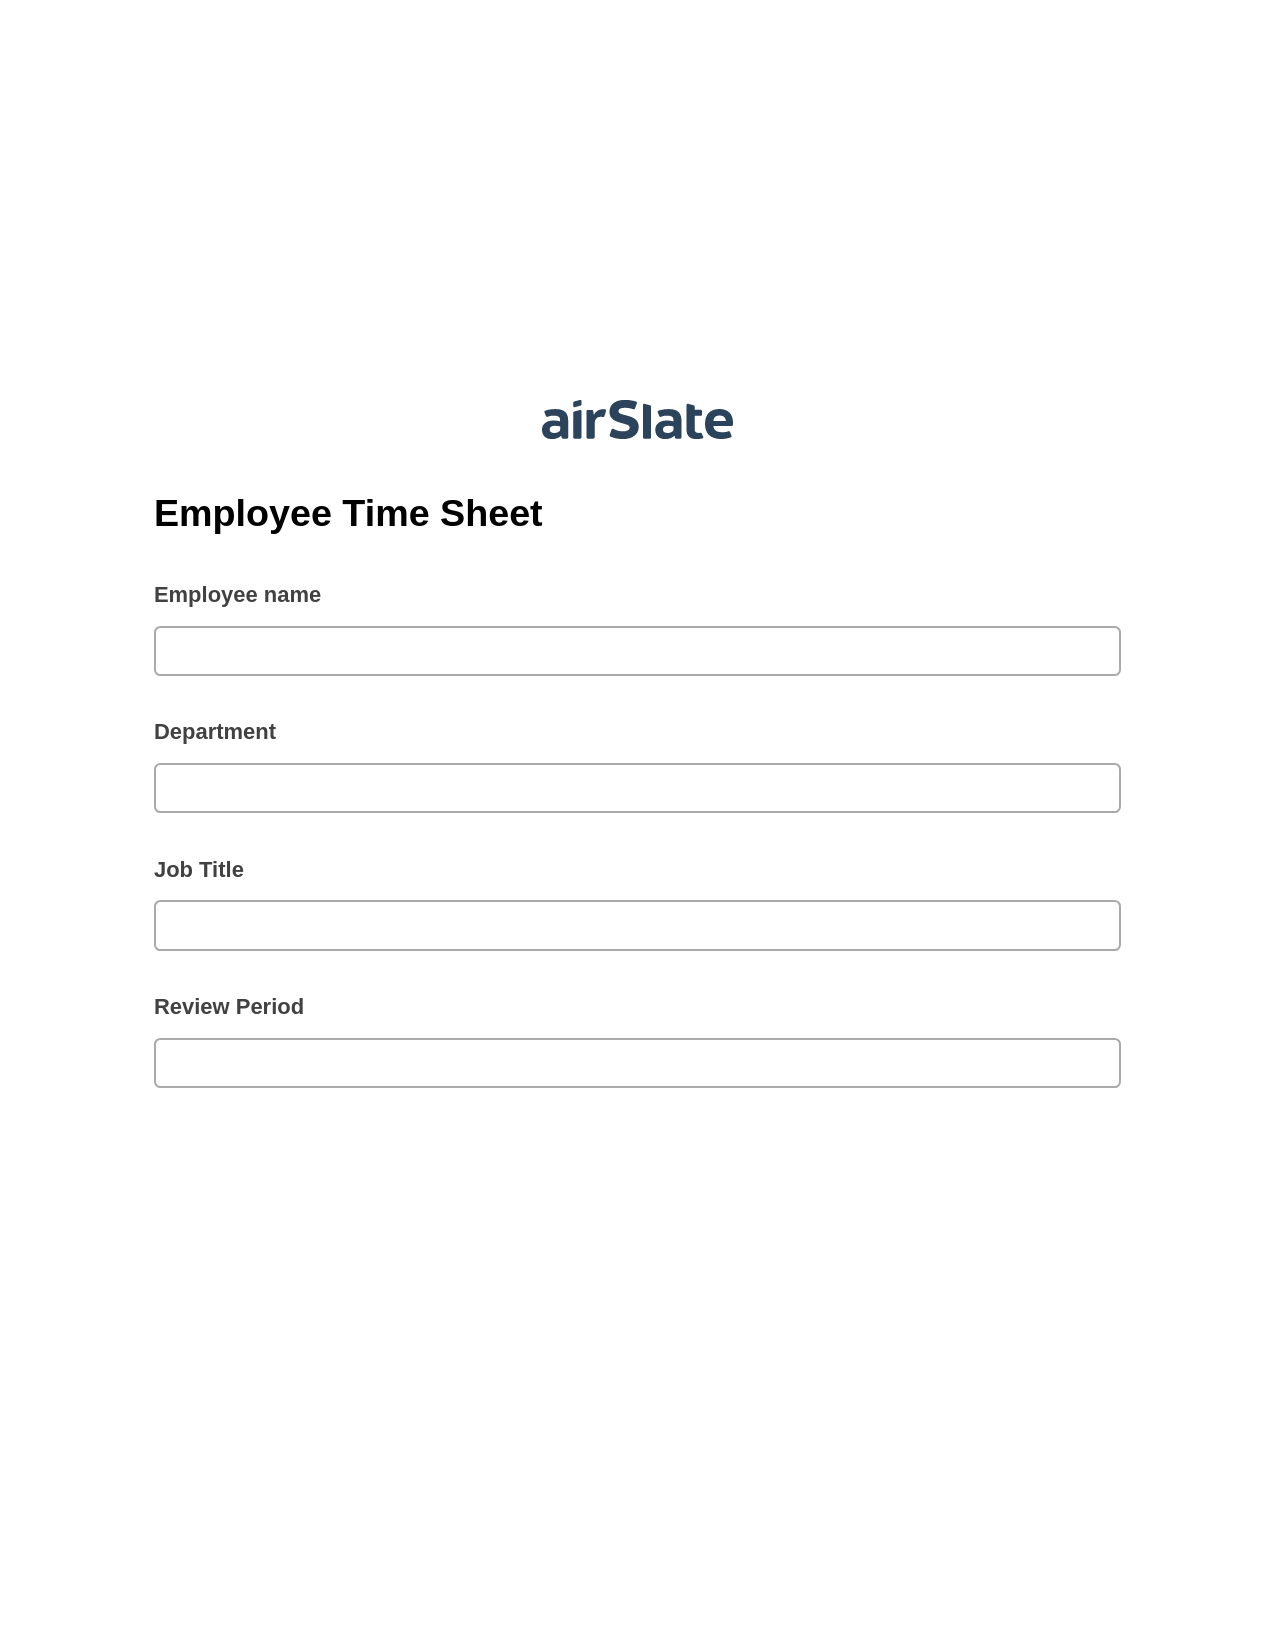 Multirole Employee Time Sheet Pre-fill from Salesforce Records Bot, Update Audit Trail Bot, Export to Google Sheet Bot